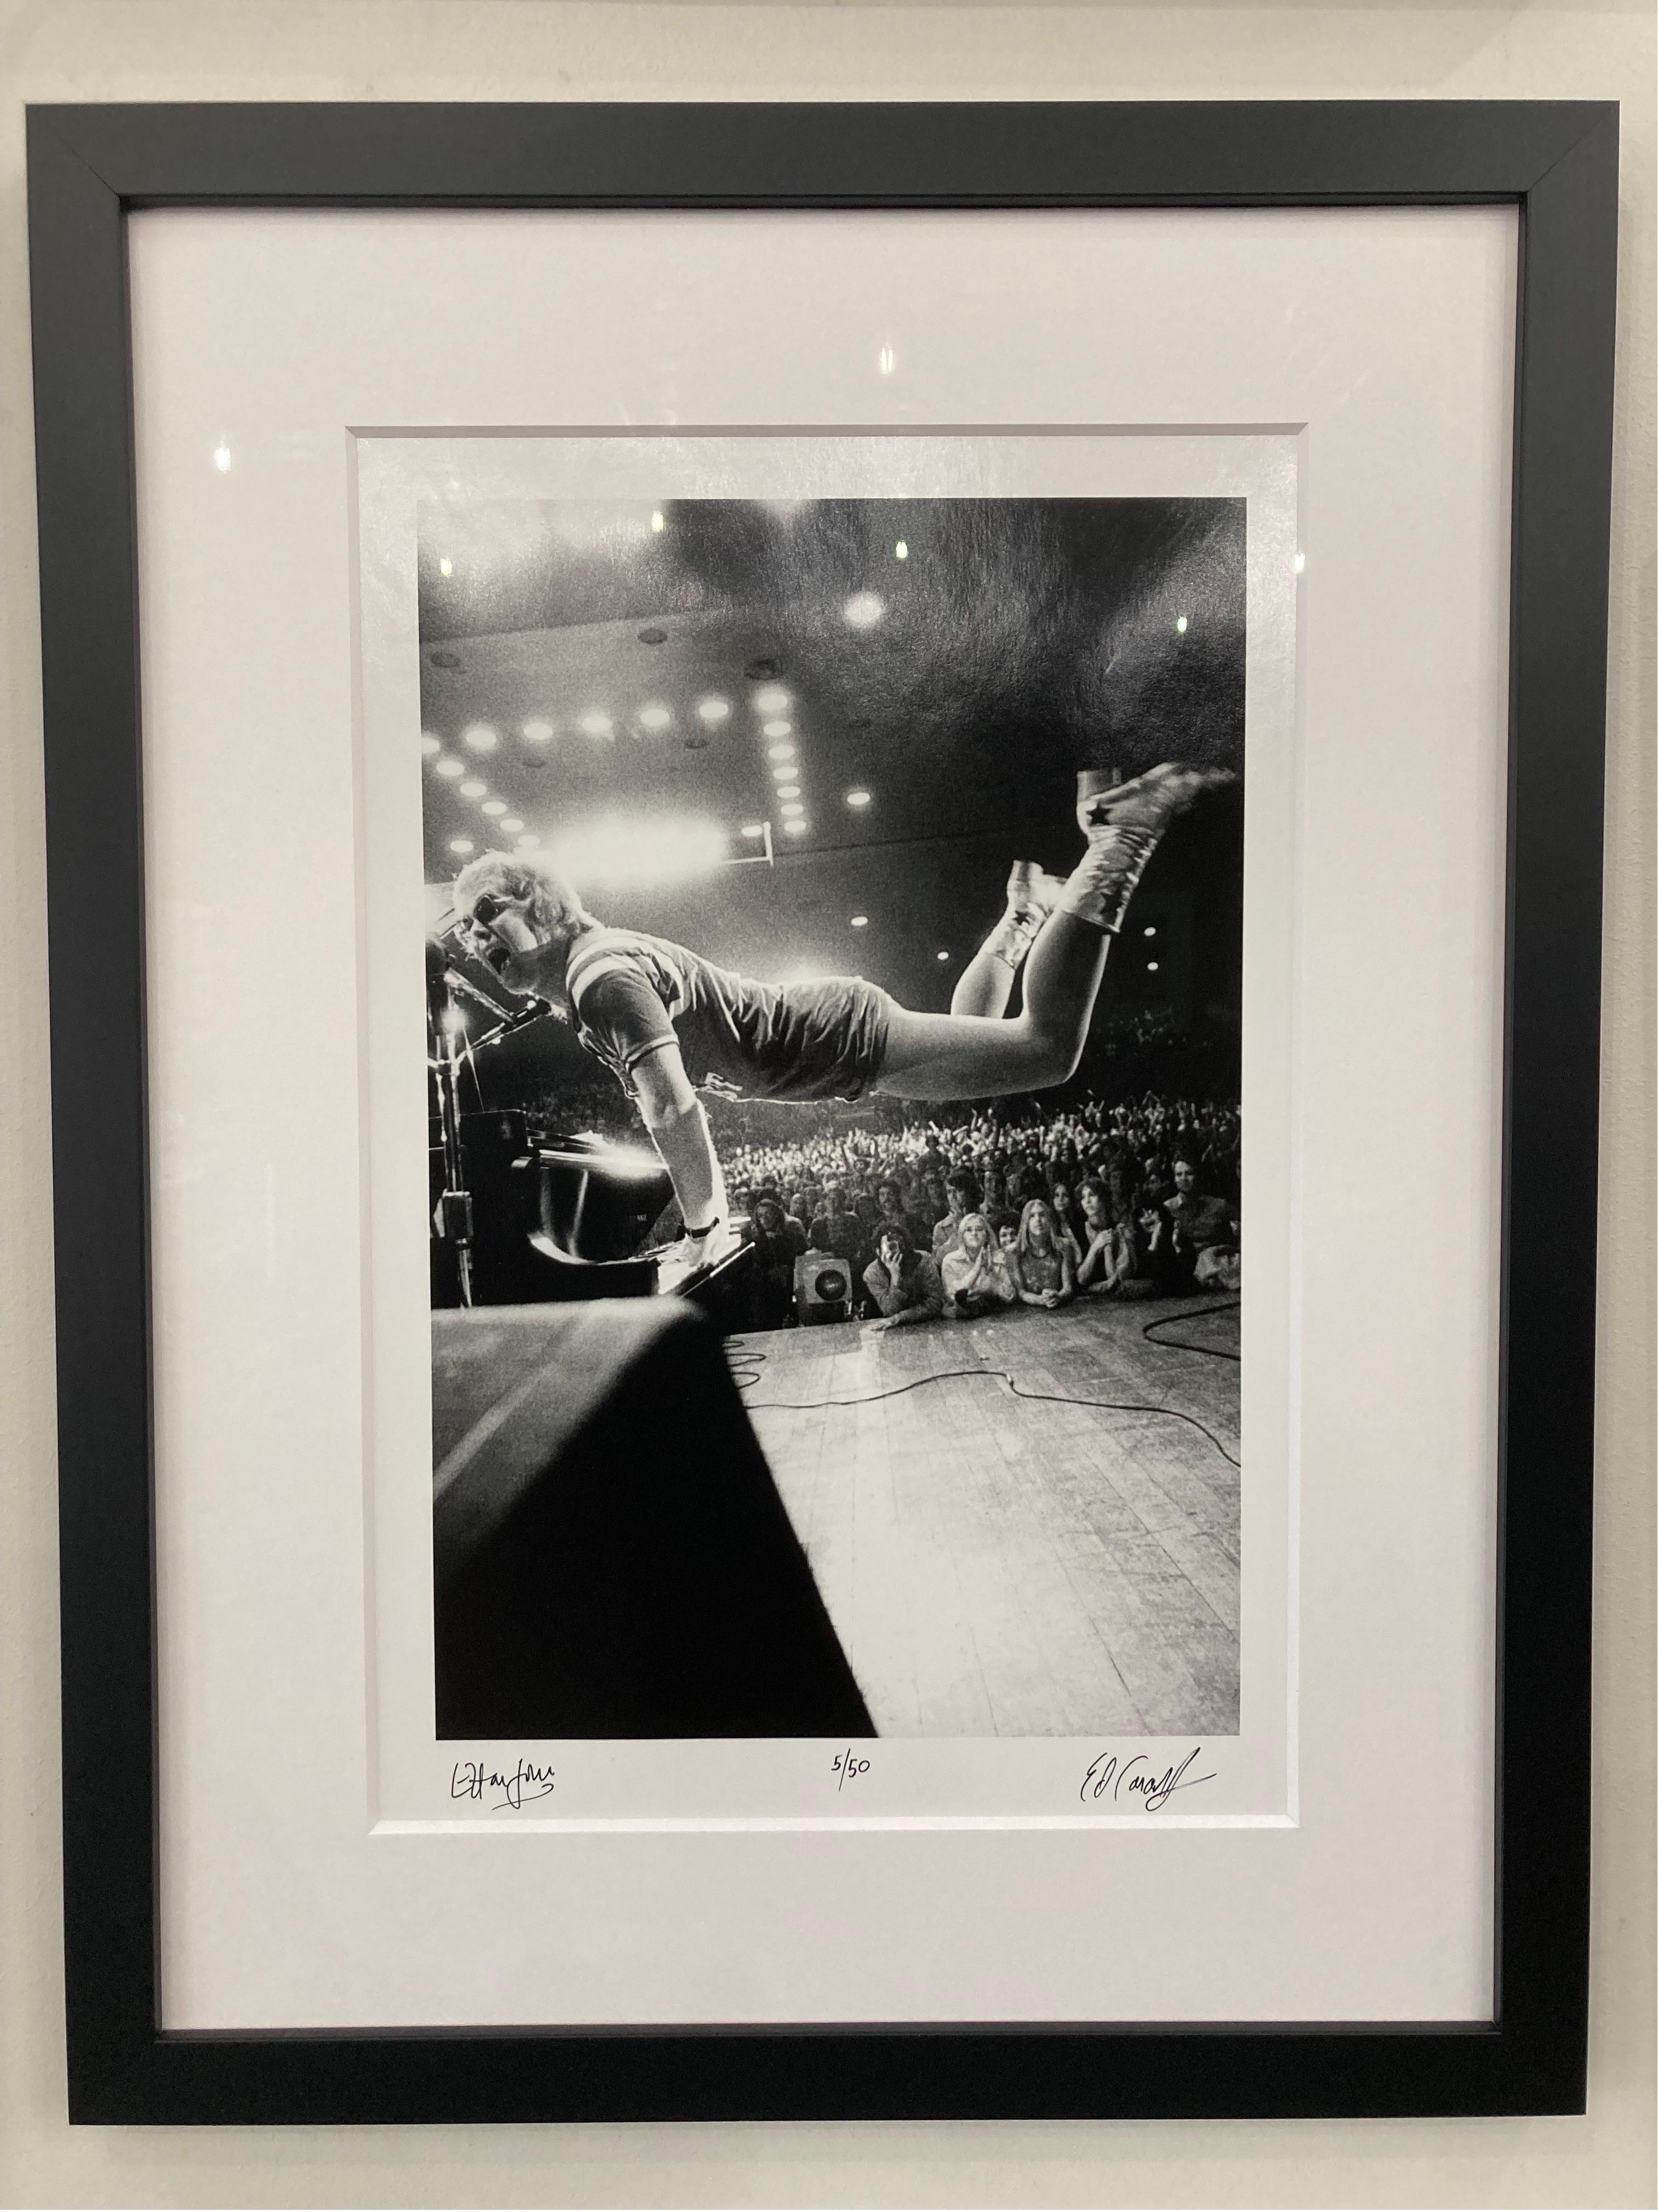 Elton John Takes Flight - Special co-signed limited edition print, framed - Photograph by Ed Caraeff